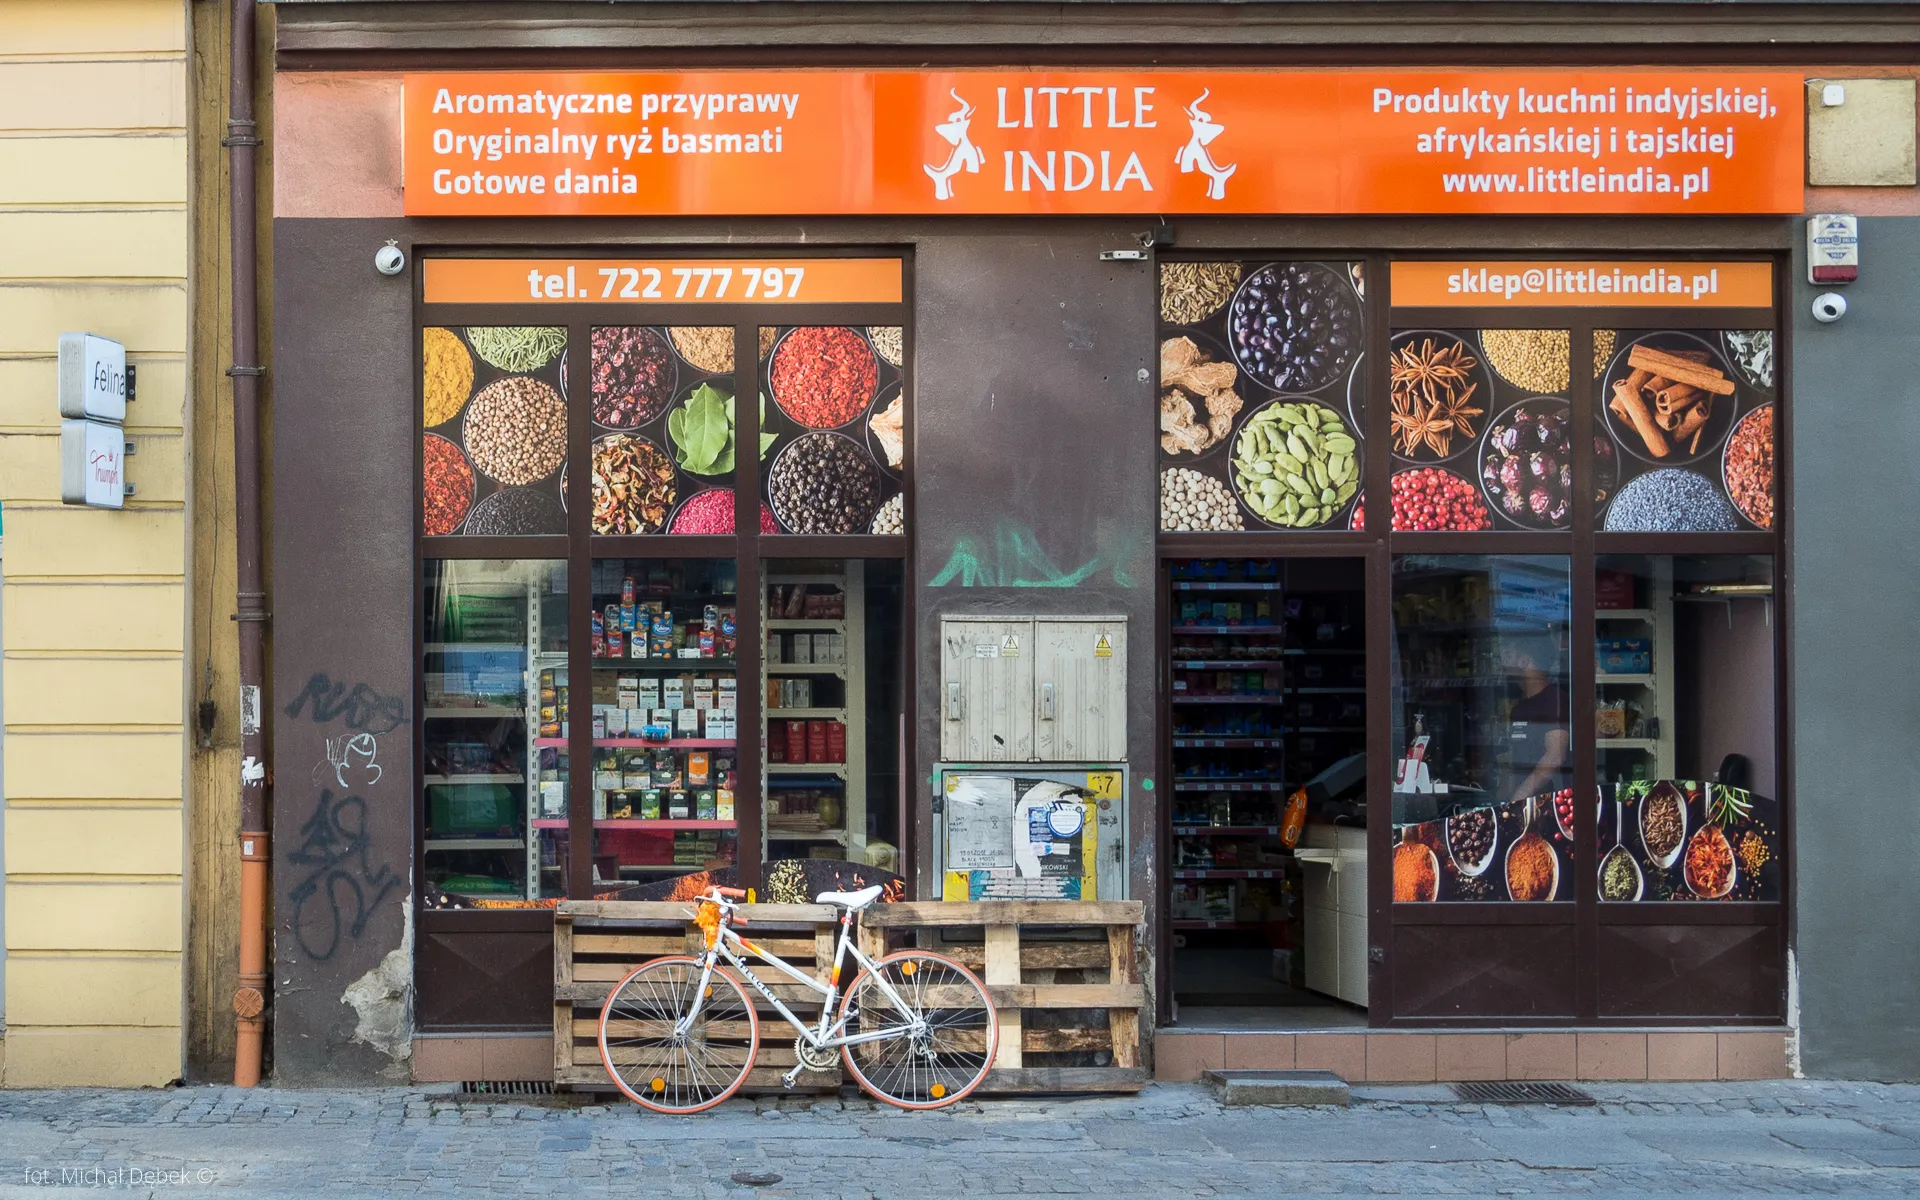 Little India in Poland, europe | Groceries - Country Helper